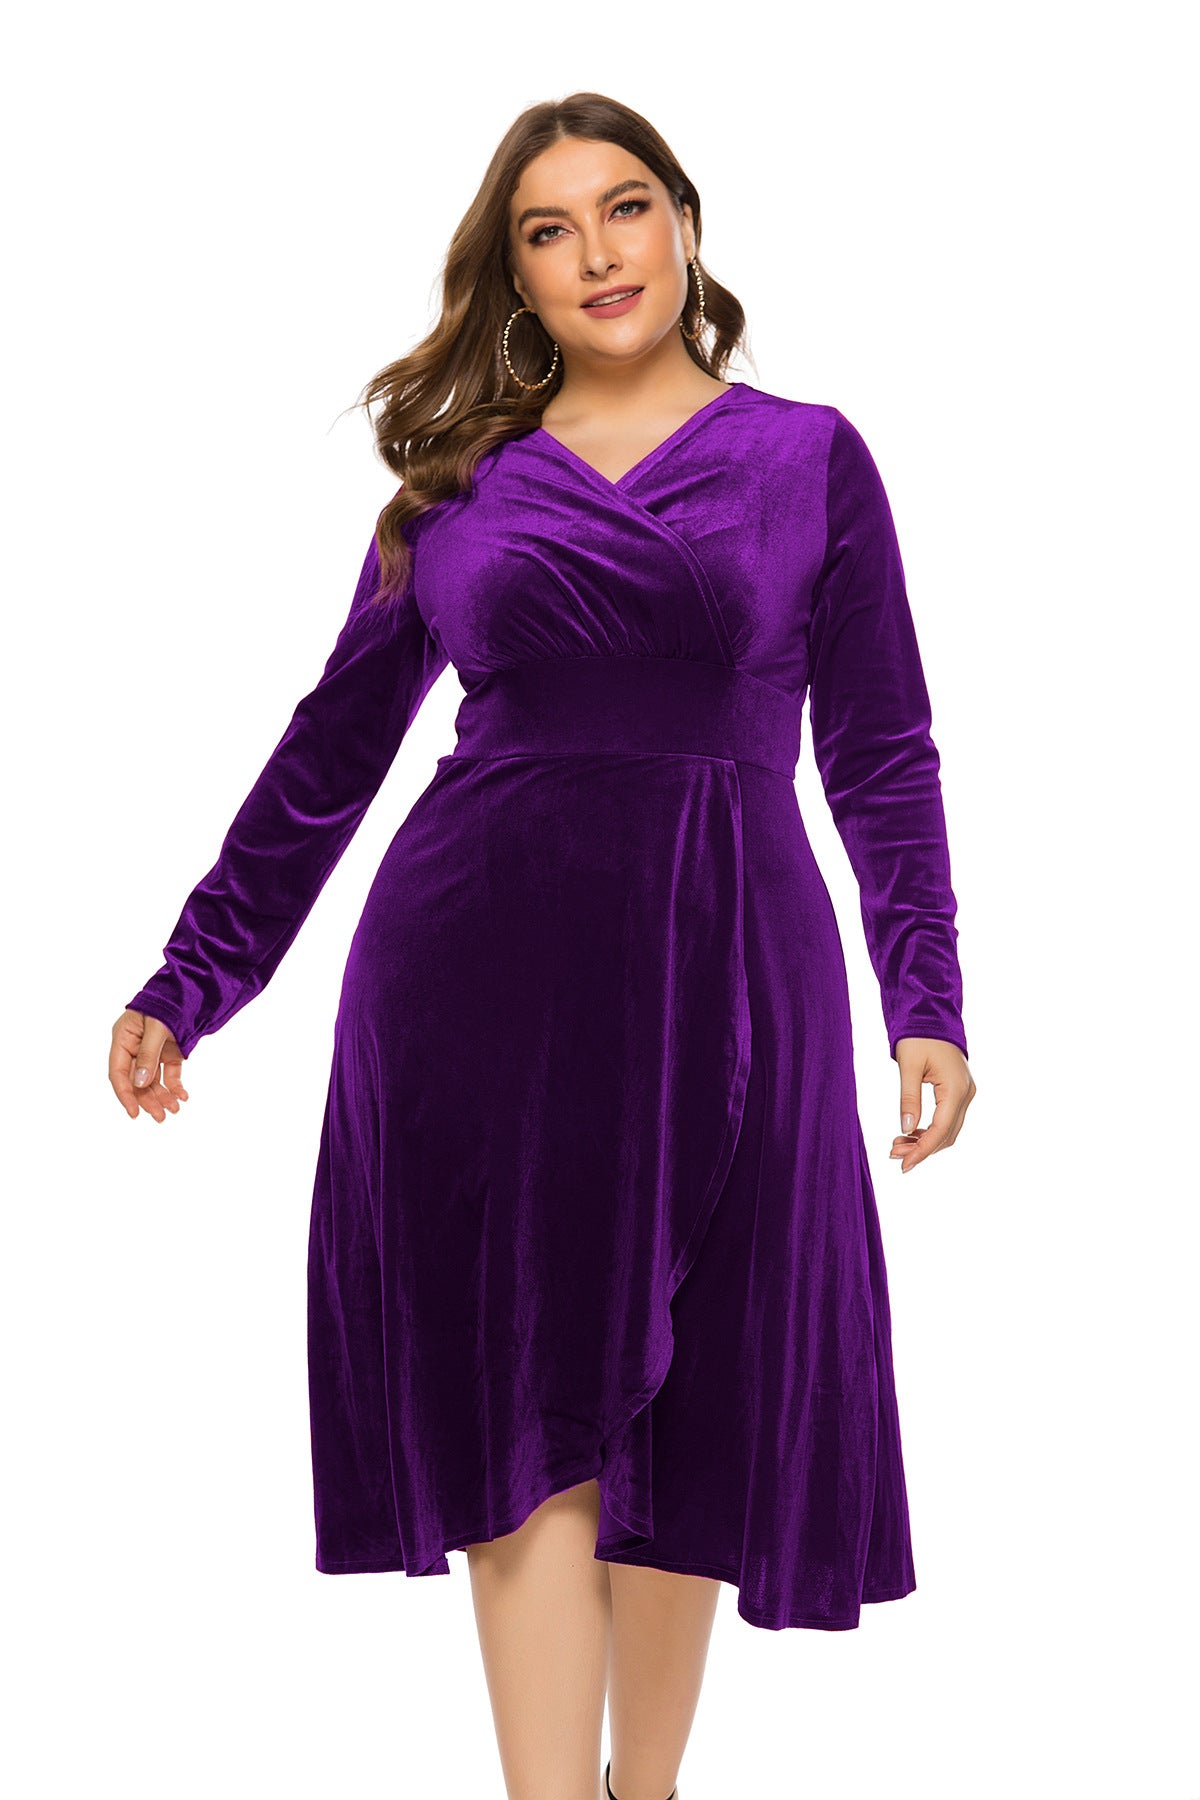 Long Sleeves Women Plus Sizes Fall Dresses-Dresses-Free Shipping at meselling99